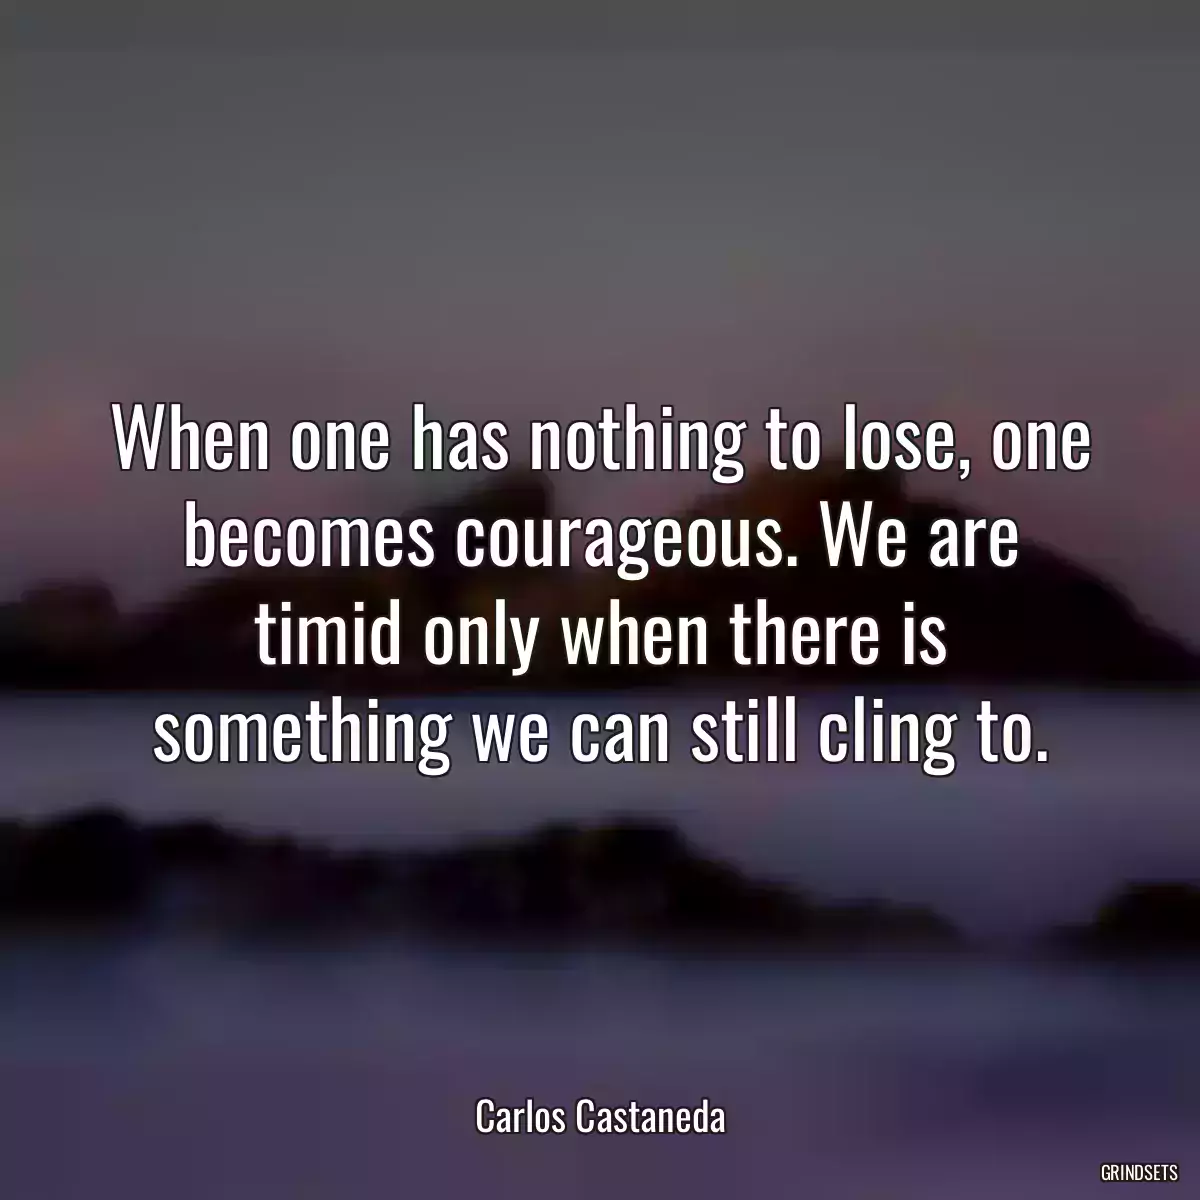 When one has nothing to lose, one becomes courageous. We are timid only when there is something we can still cling to.